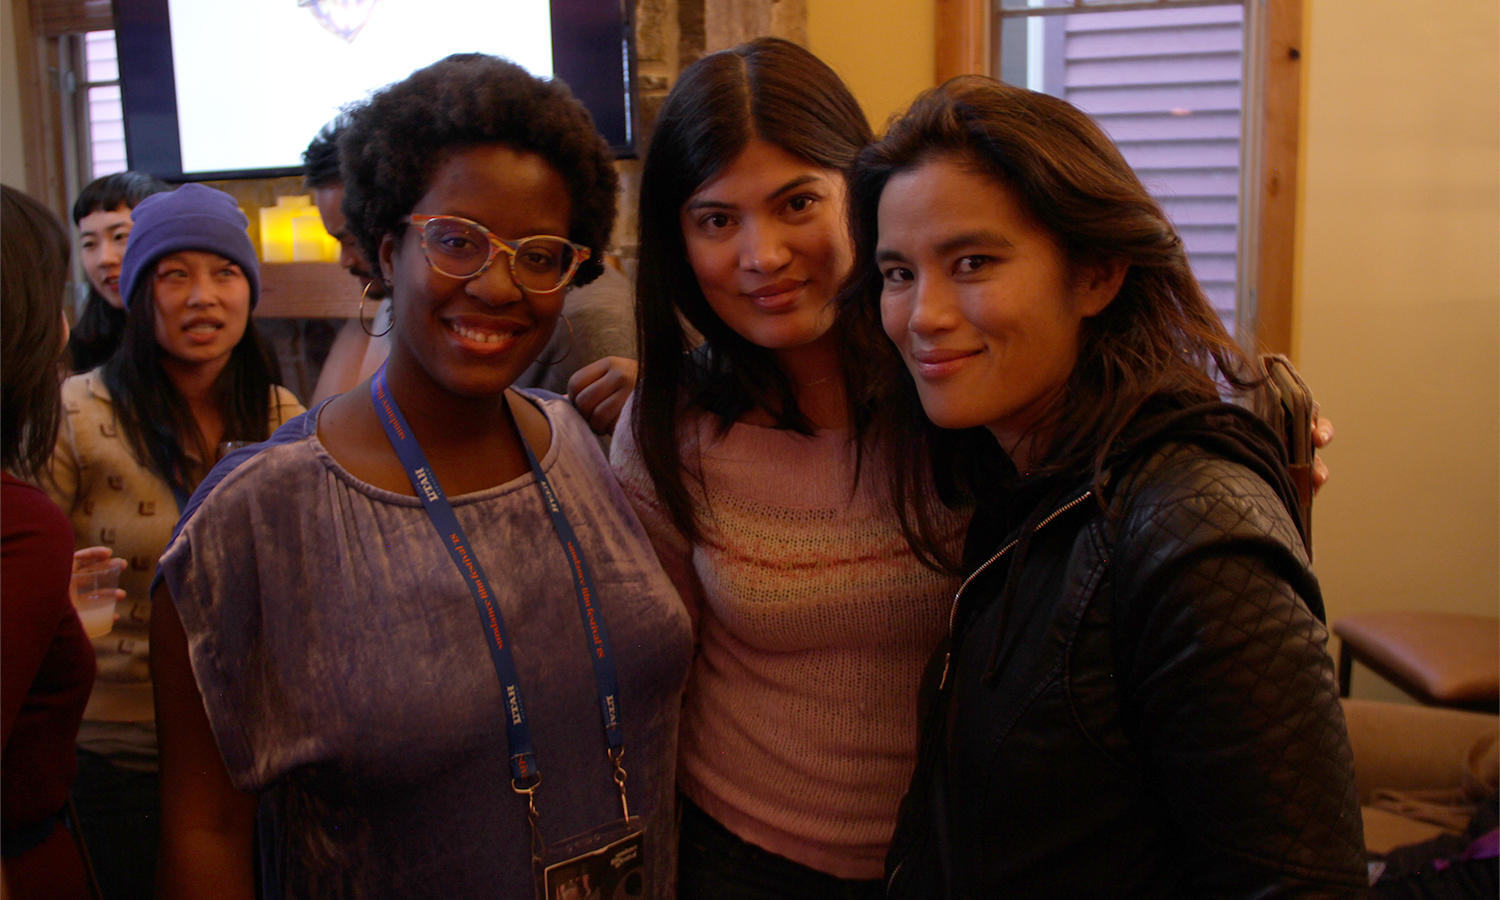  Kickstarter Lodge’s Iyabo Boyd is greeted by filmmakers Valerie Castillo Martinez and Diane Paragas. (Photo: Abraham Ferrer/Visual Communications Photographic Archive) 